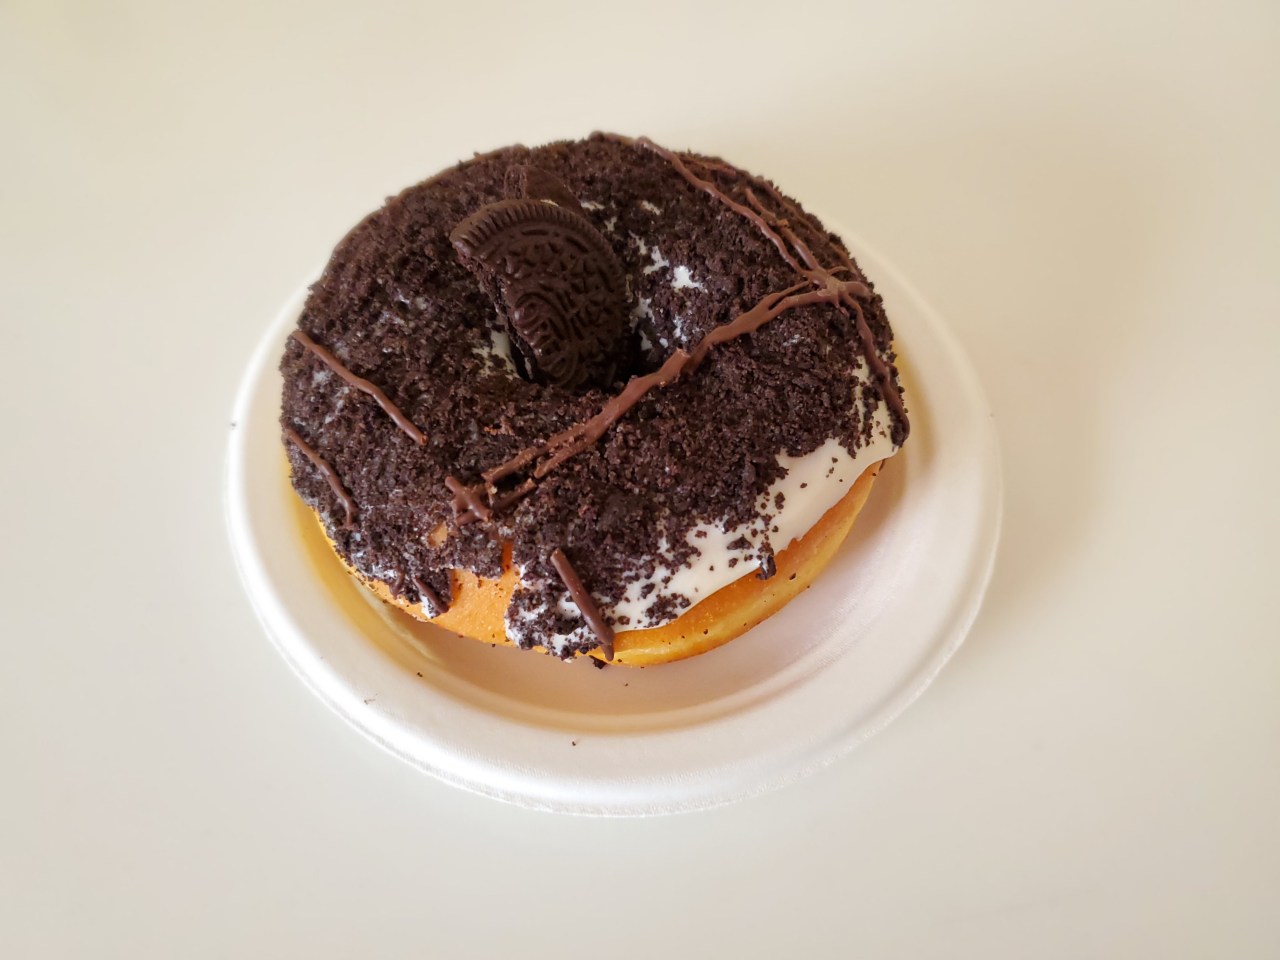 OH MY OREO doughnut from Destination Doughnuts. - Sponsored by my company bcos we did “well” as a “company” so it was like a staff appreciation thing. Pretty sure this was my 1st experience with this doughnut place. .. & I’m pretty sure it’ll likely be my last? Or at least, I don’t know. .. if my company does another thing like this, I’ll likely give mine away. Why? I love Oreos - so the topping portion was great! The doughnut itself was pretty gross to me =/  maybe “real” doughnuts are supposed to be like this texture but my palette is too accustomed to the cheap Timmies’ doughunts. .. I like the soft, foamy, ‘hollow’ .. type of doughnut, you know? The texture of this one was like. .. maybe 40% of that of a bagel??? It was so dough-y & off to me. It was also kinda yeast-y in flavour, which I do not like at all. It was really weird. I don’t know how others feel about it but from my work ‘group’, it seemed like everyone was a fan. So I don’t know, maybe it’s just me haha #food#doughnut#donut#destination doughnut#oreo#sweet